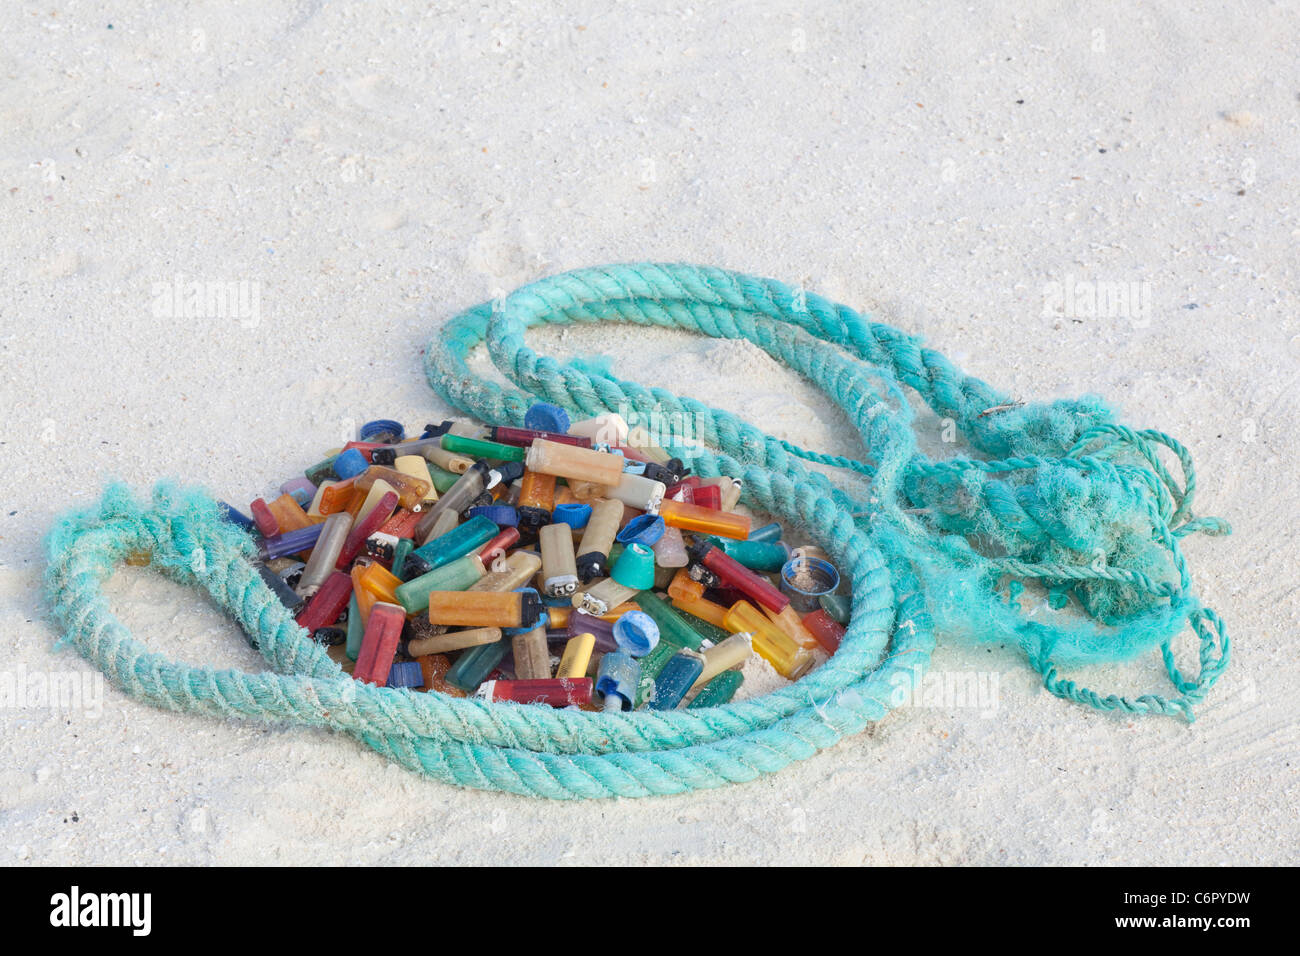 Cigarette lighters and rope, marine debris washed ashore on a pacific island then collected by tourists to prevent harm to seabirds or other wildlife Stock Photo